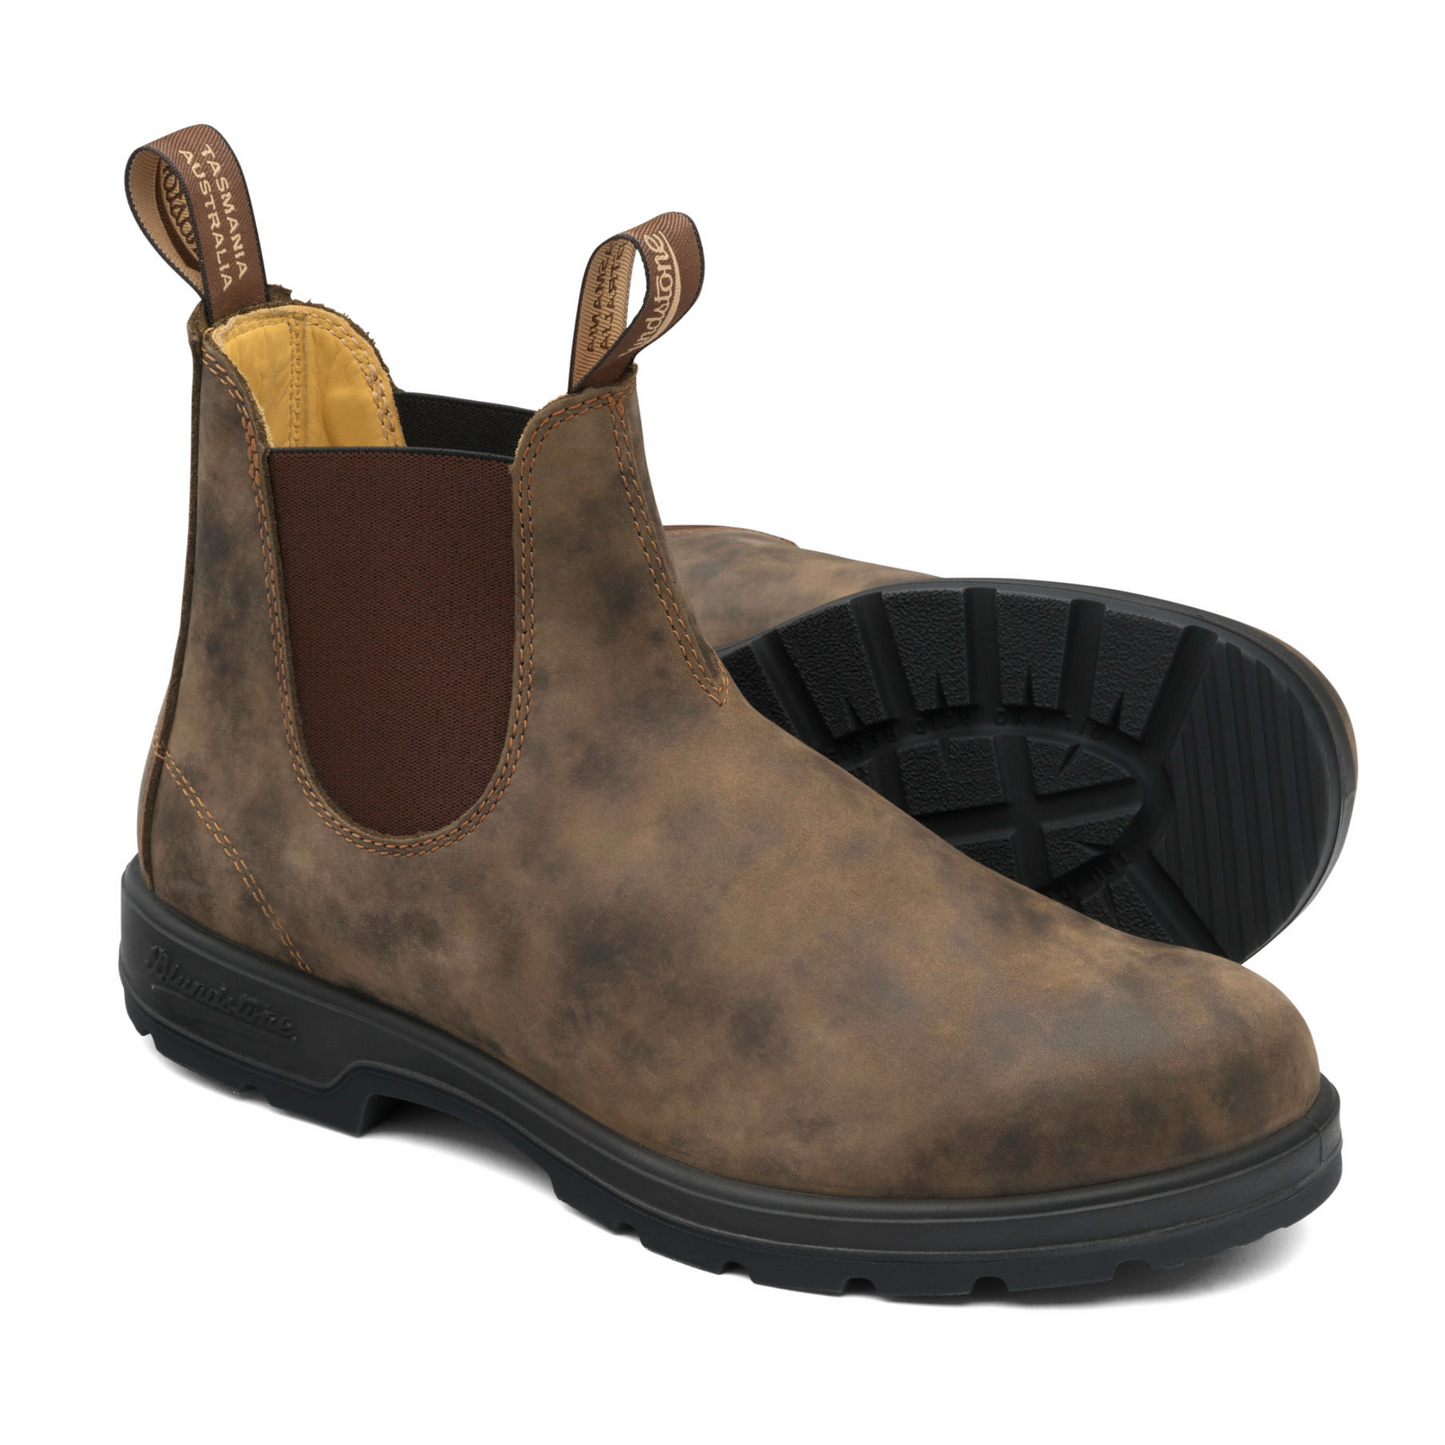 A pair of unisex leather boots. Black sole and brown, branded pull-on straps.